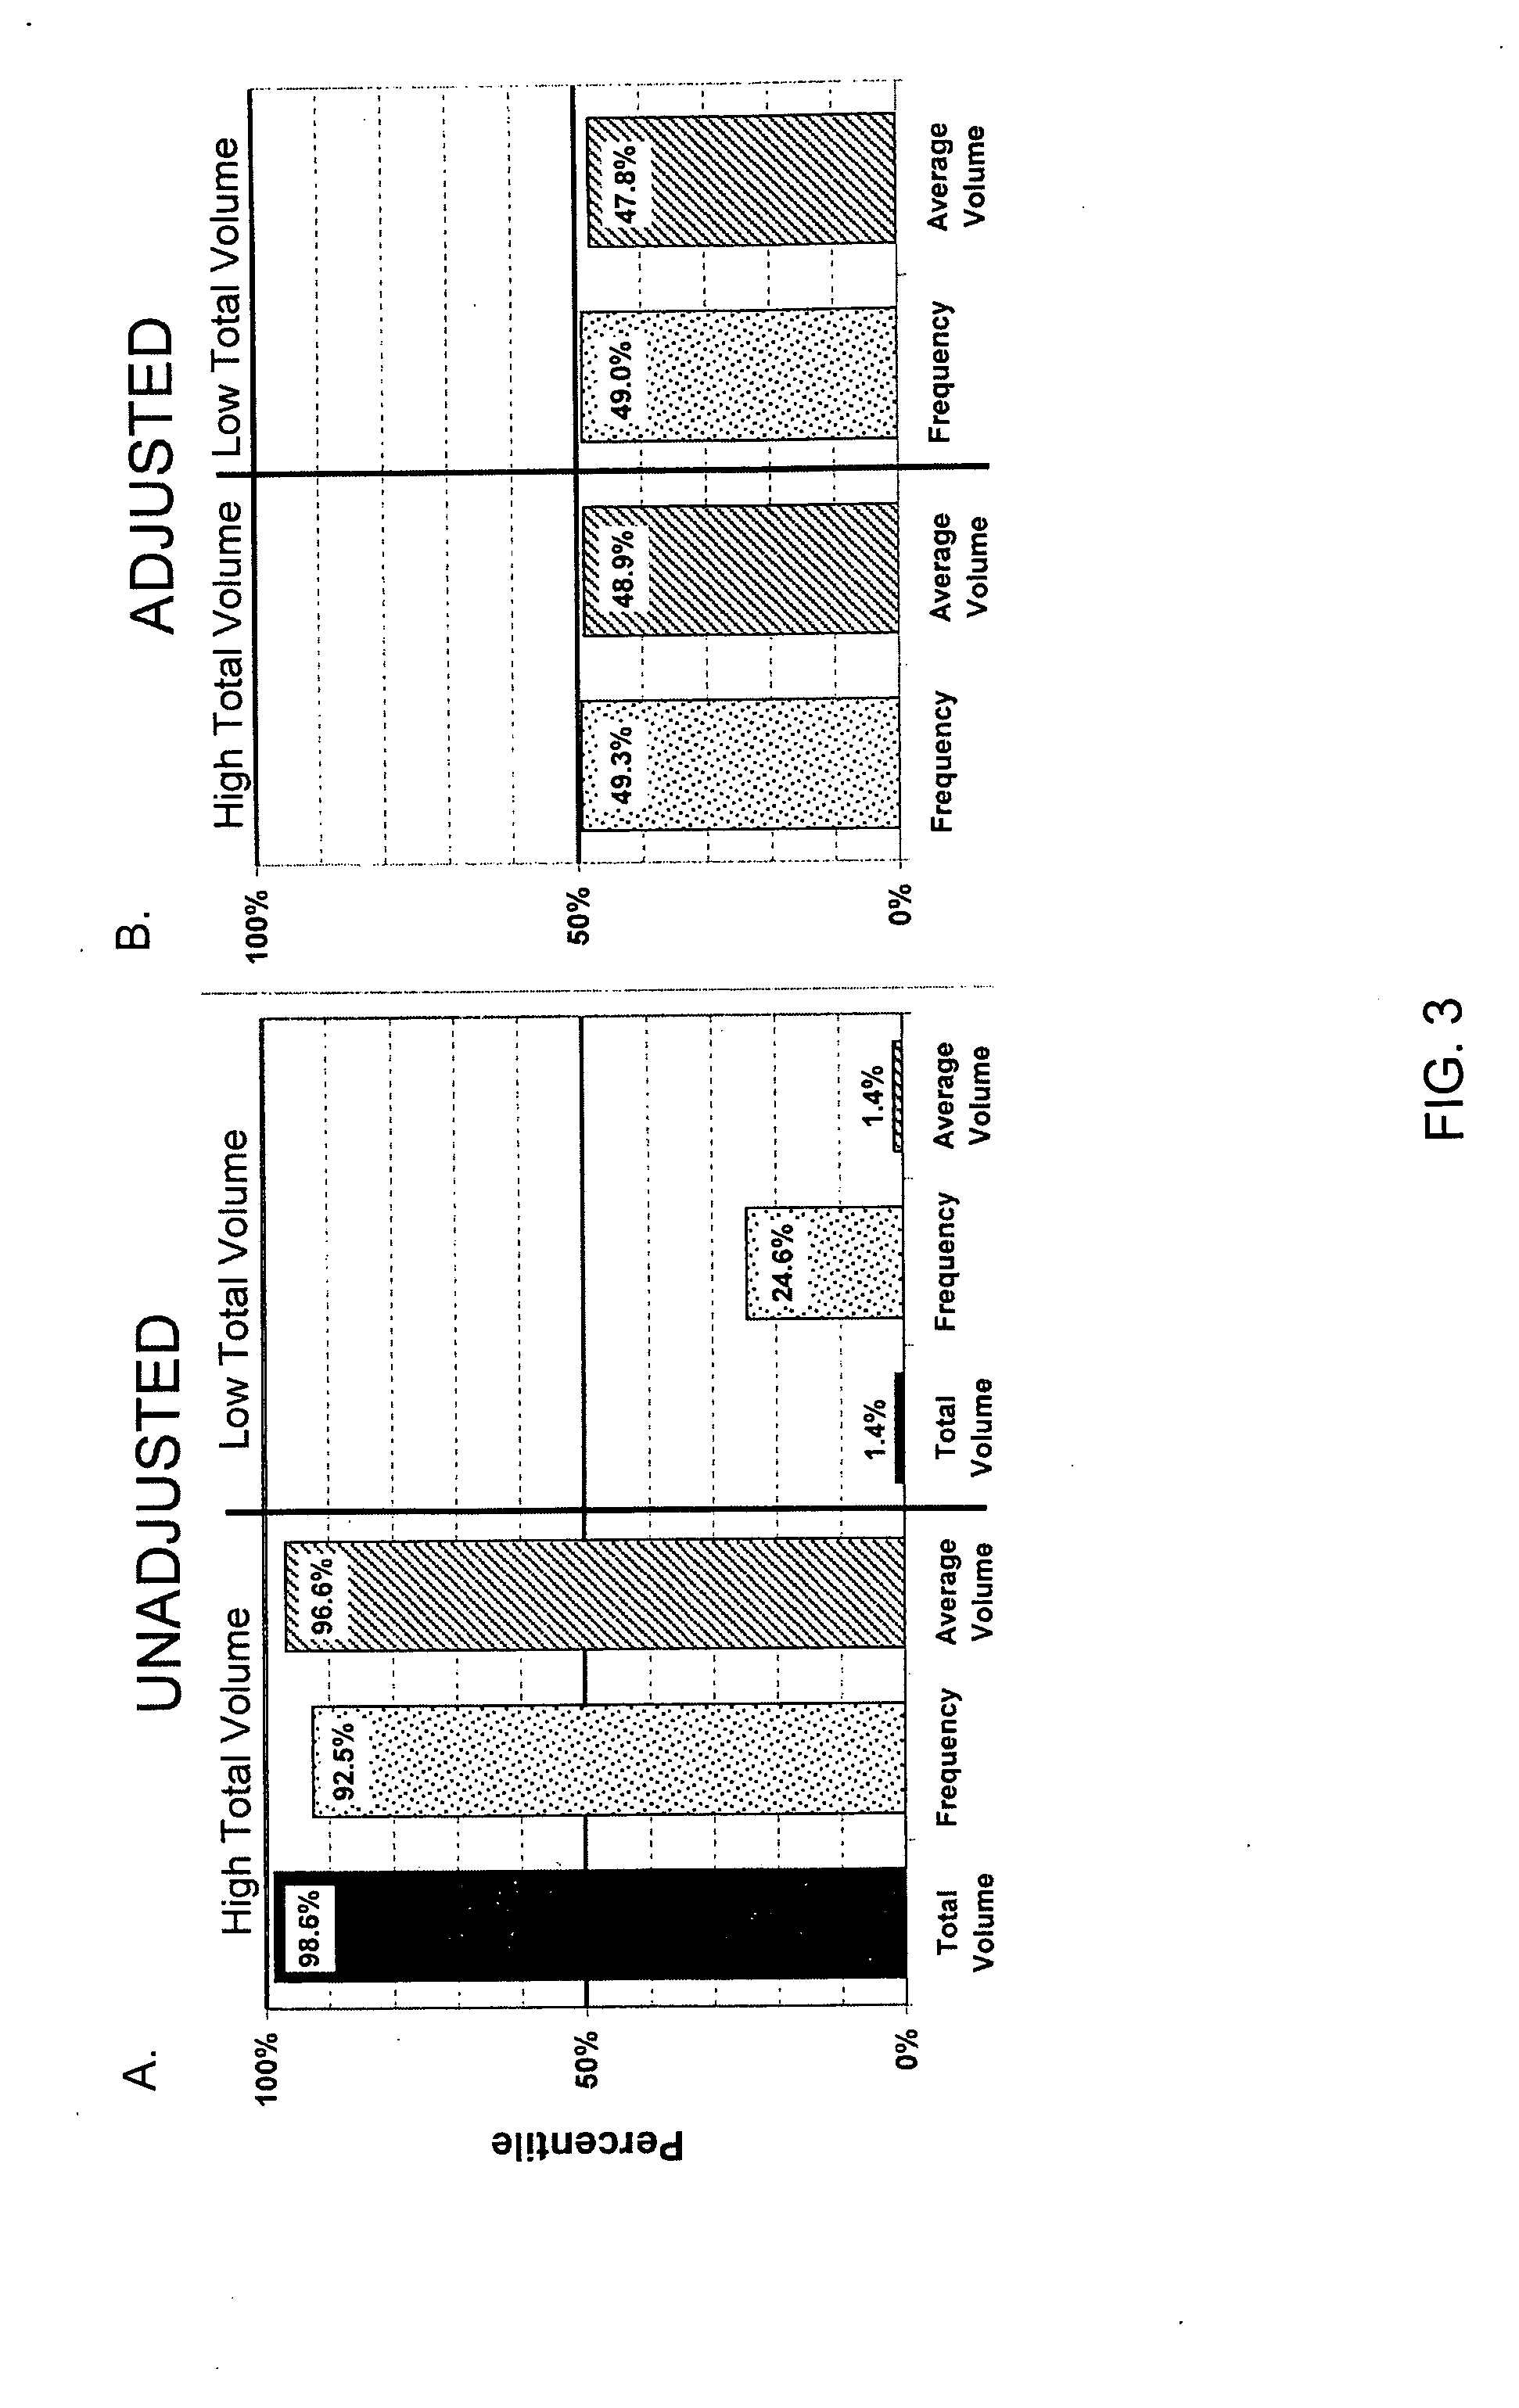 Method of adjusting bladder capacity and voiding frequency measurements